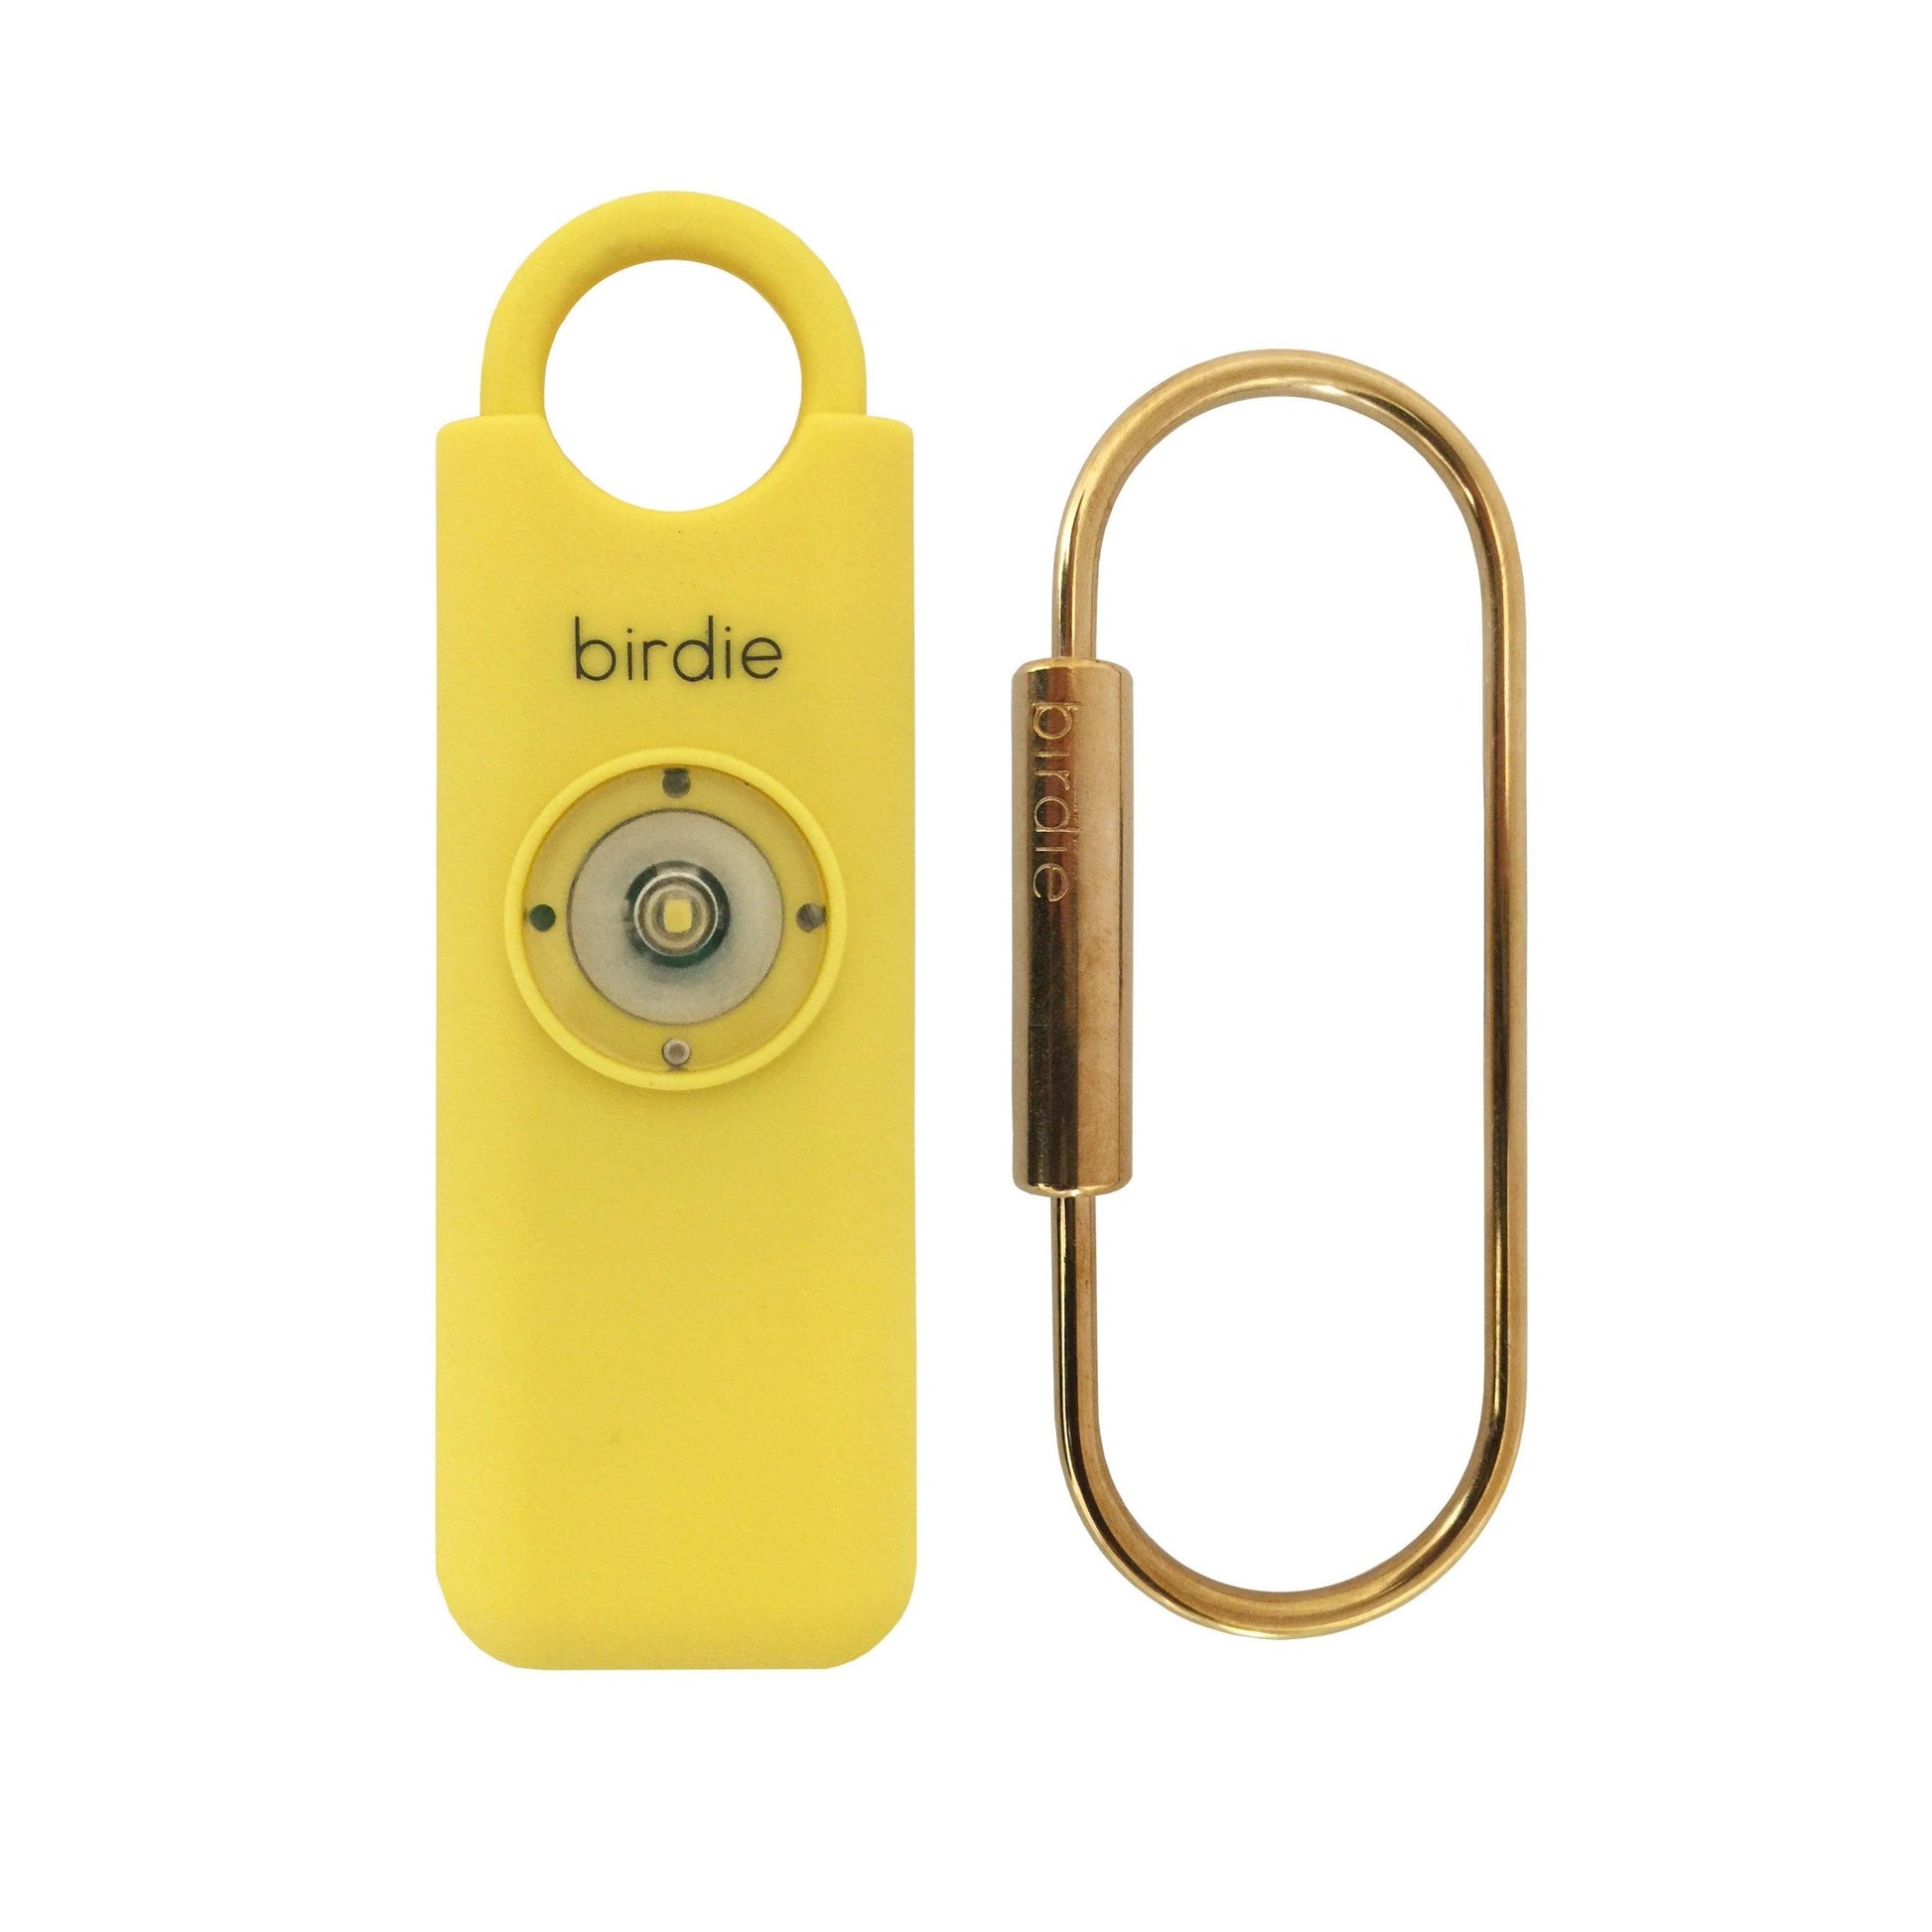 She's Birdie Personal Safety Alarm (Various Colors) - Haven